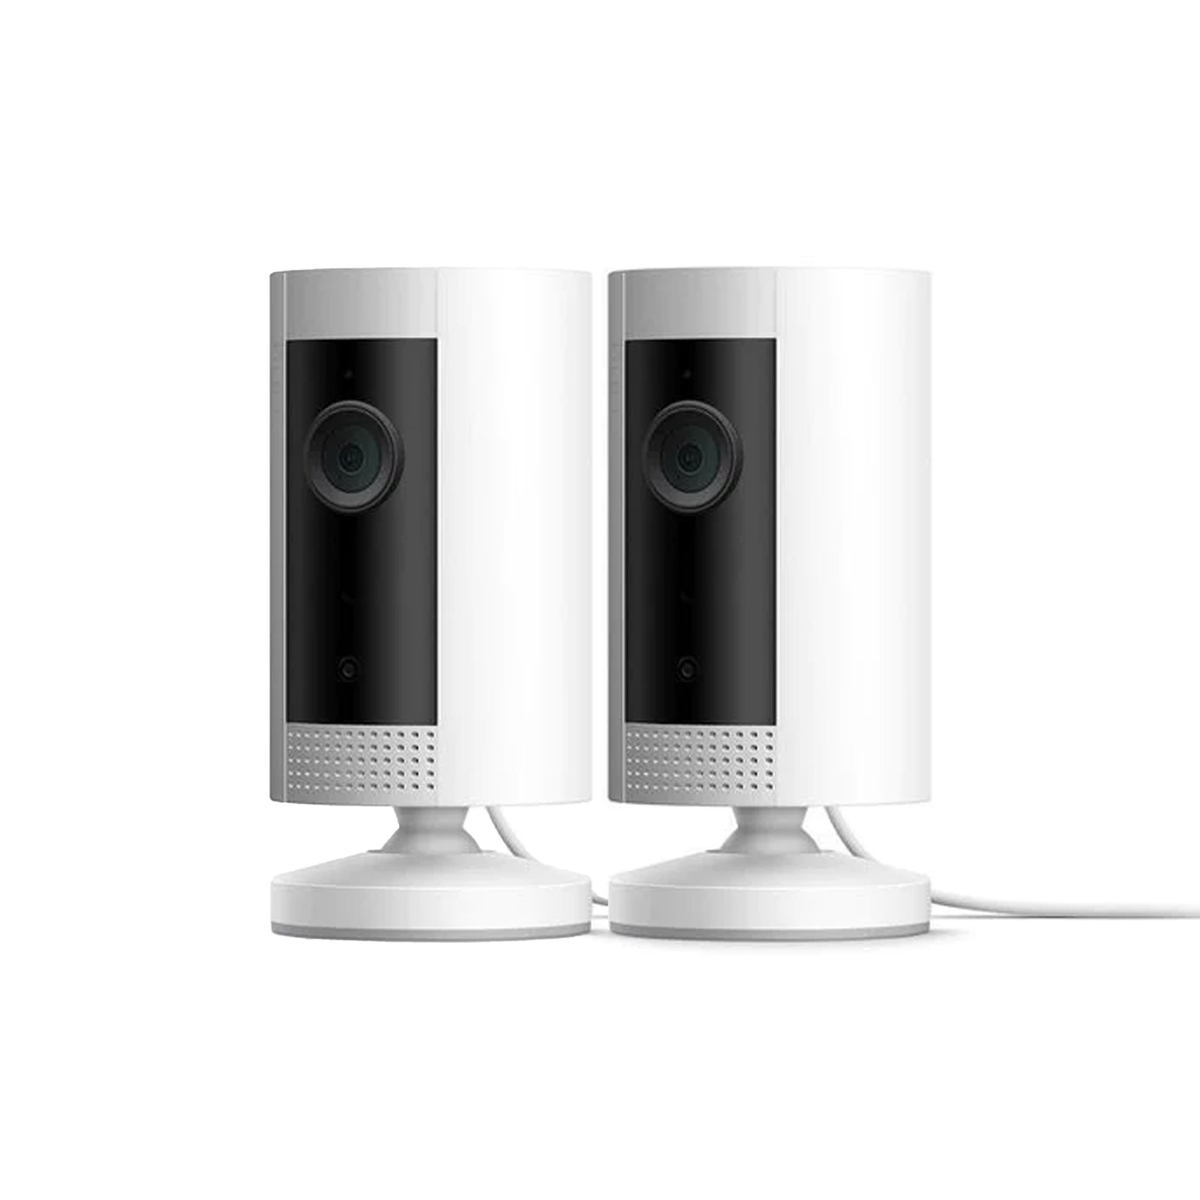 Ring Home Security Indoor Camera, 1080p HD, 2 Pack Bundle, White, 8SN1S9-WME2